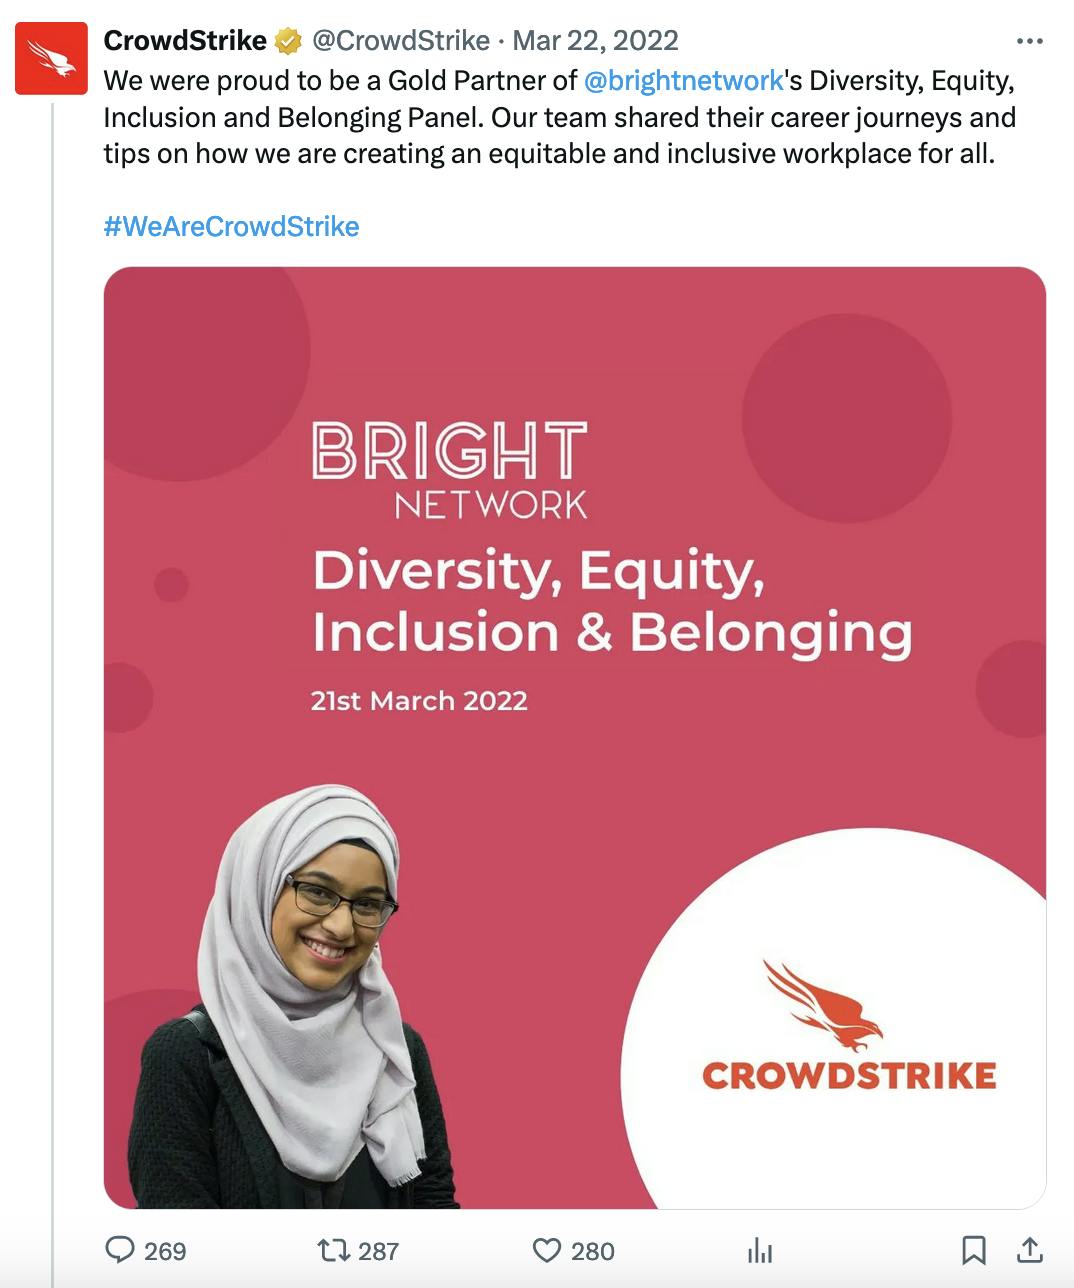 Twitter screenshot CrowdStrike @CrowdStrike: We were proud to be a Gold Partner of @brightnetwork 's Diversity, Equity, Inclusion and Belonging Panel. Our team shared their career journeys and tips on how we are creating an equitable and inclusive workplace for all. #WeAreCrowdStrike with a photo of a woman wearing hijab